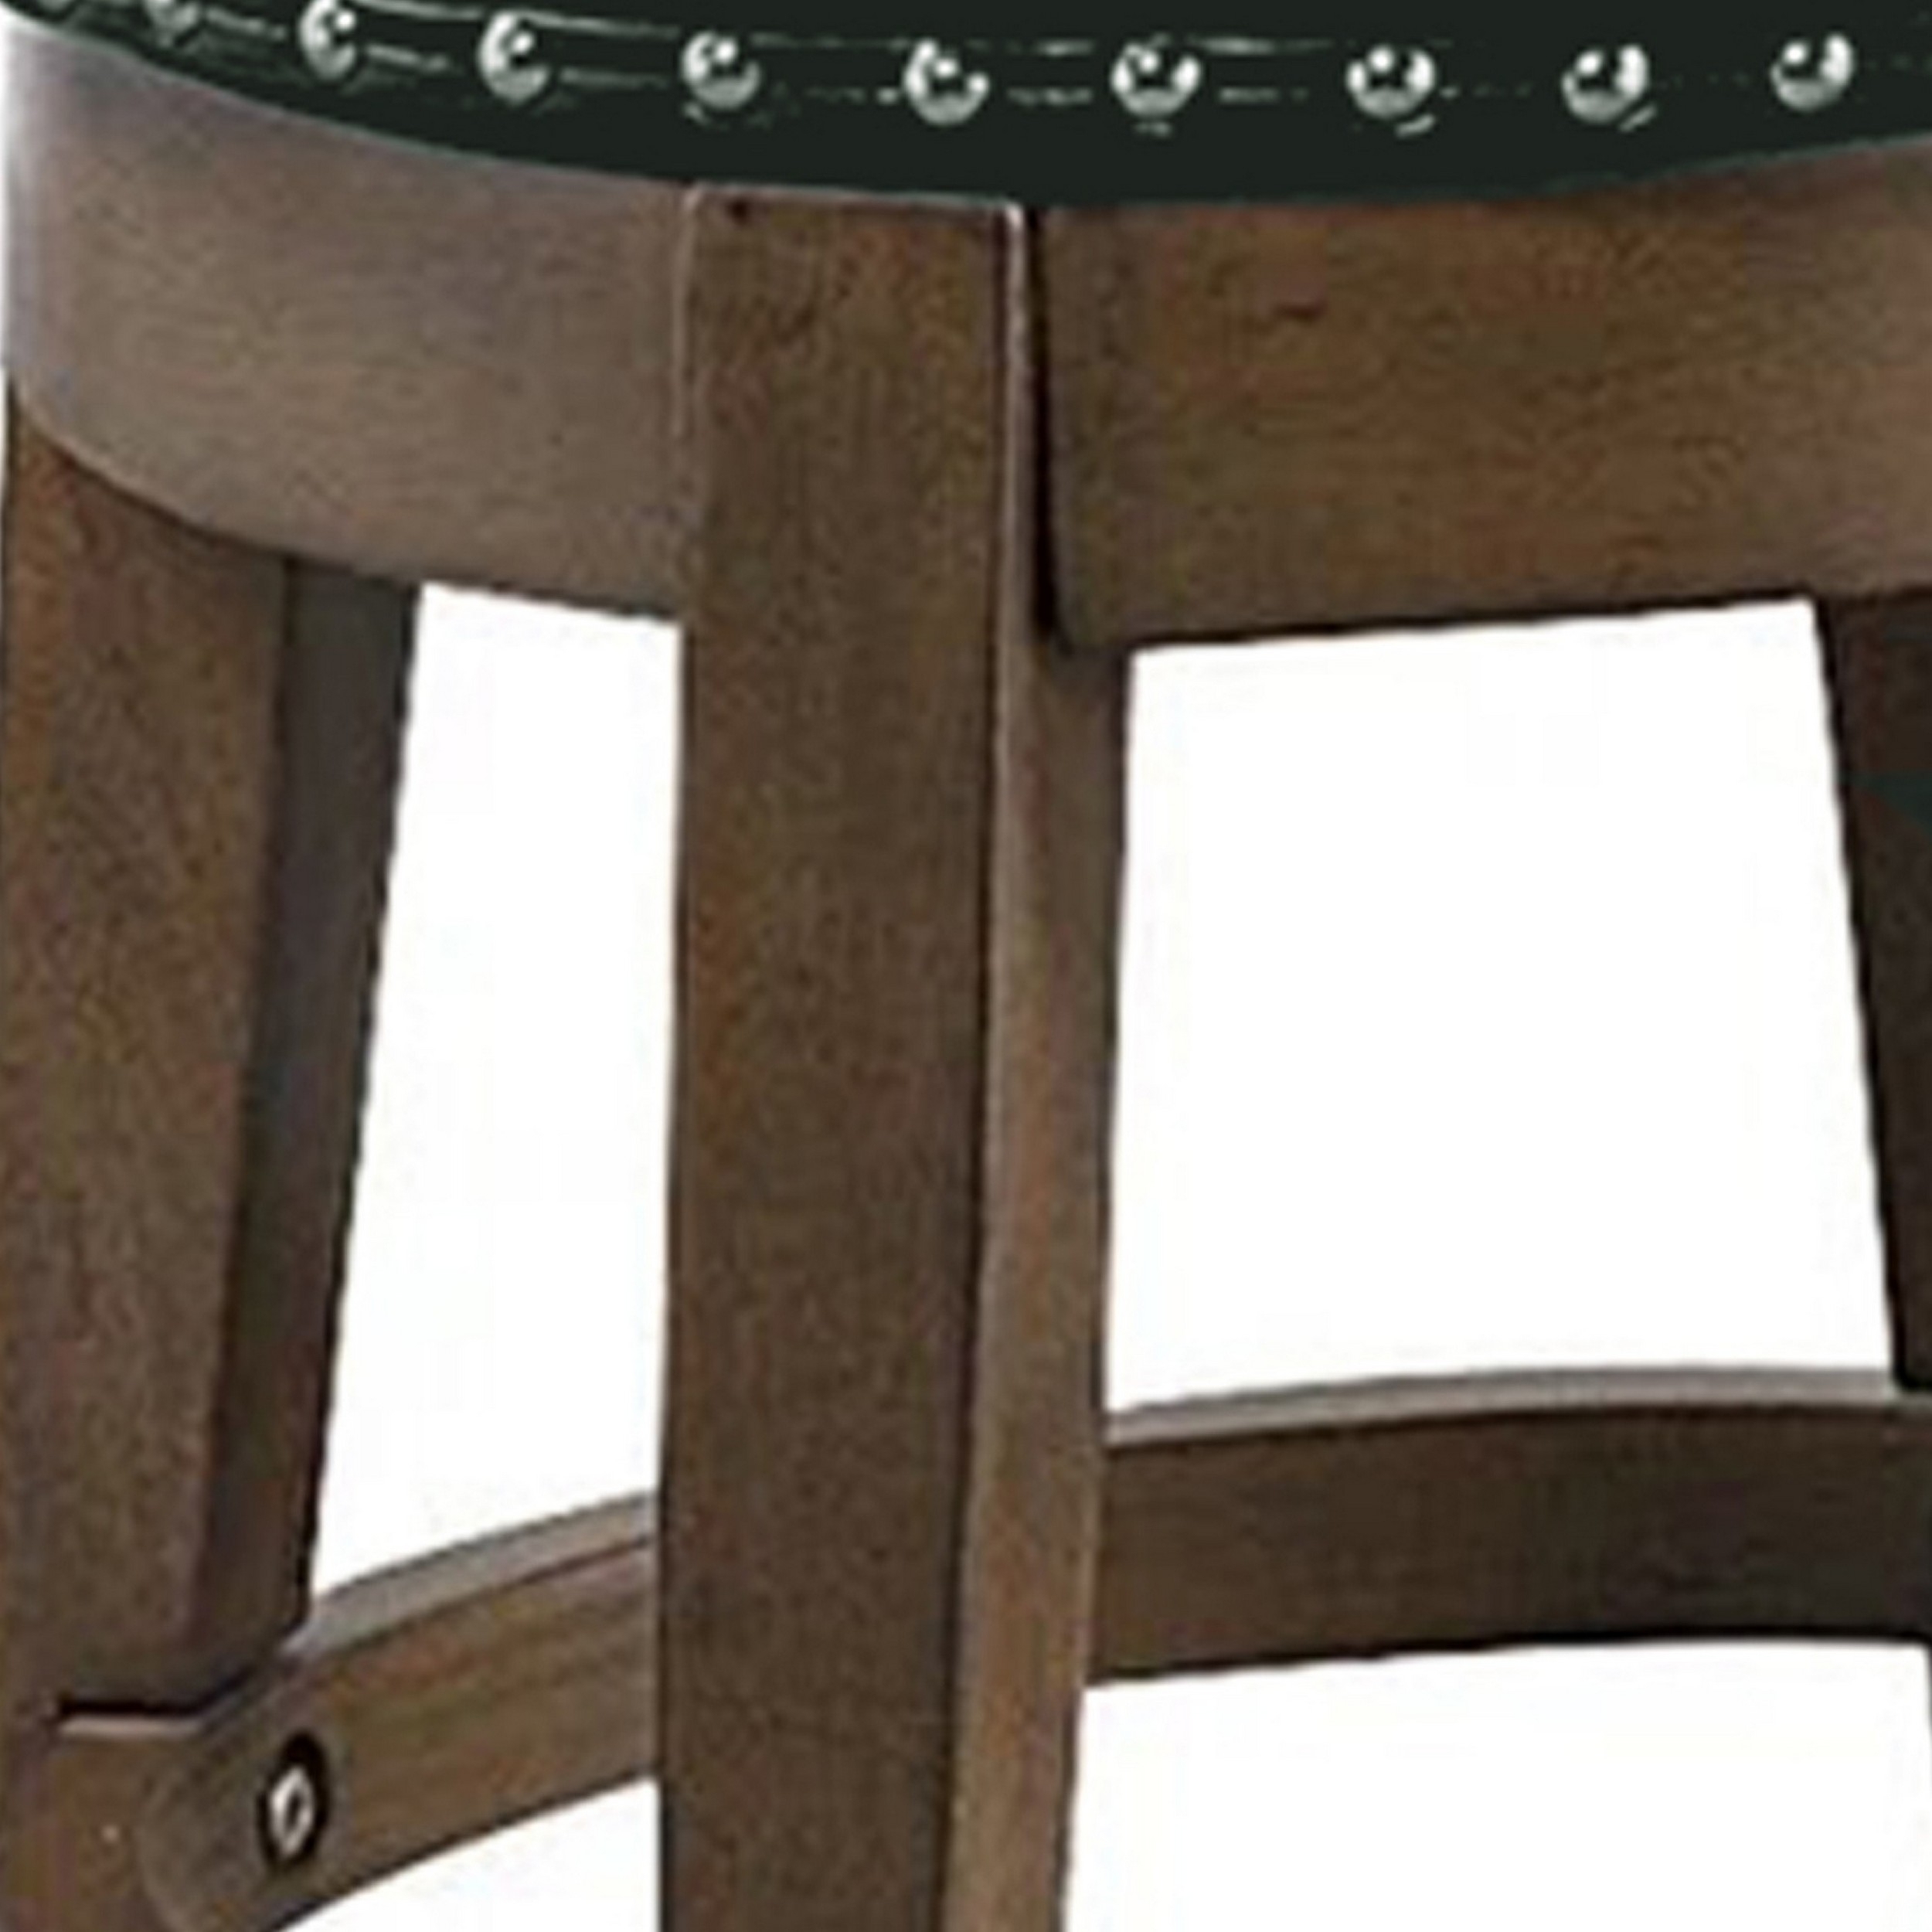 Drue 24 Inch Set Of 2 Swivel Counter Stools, Brown Wood Green Faux Leather